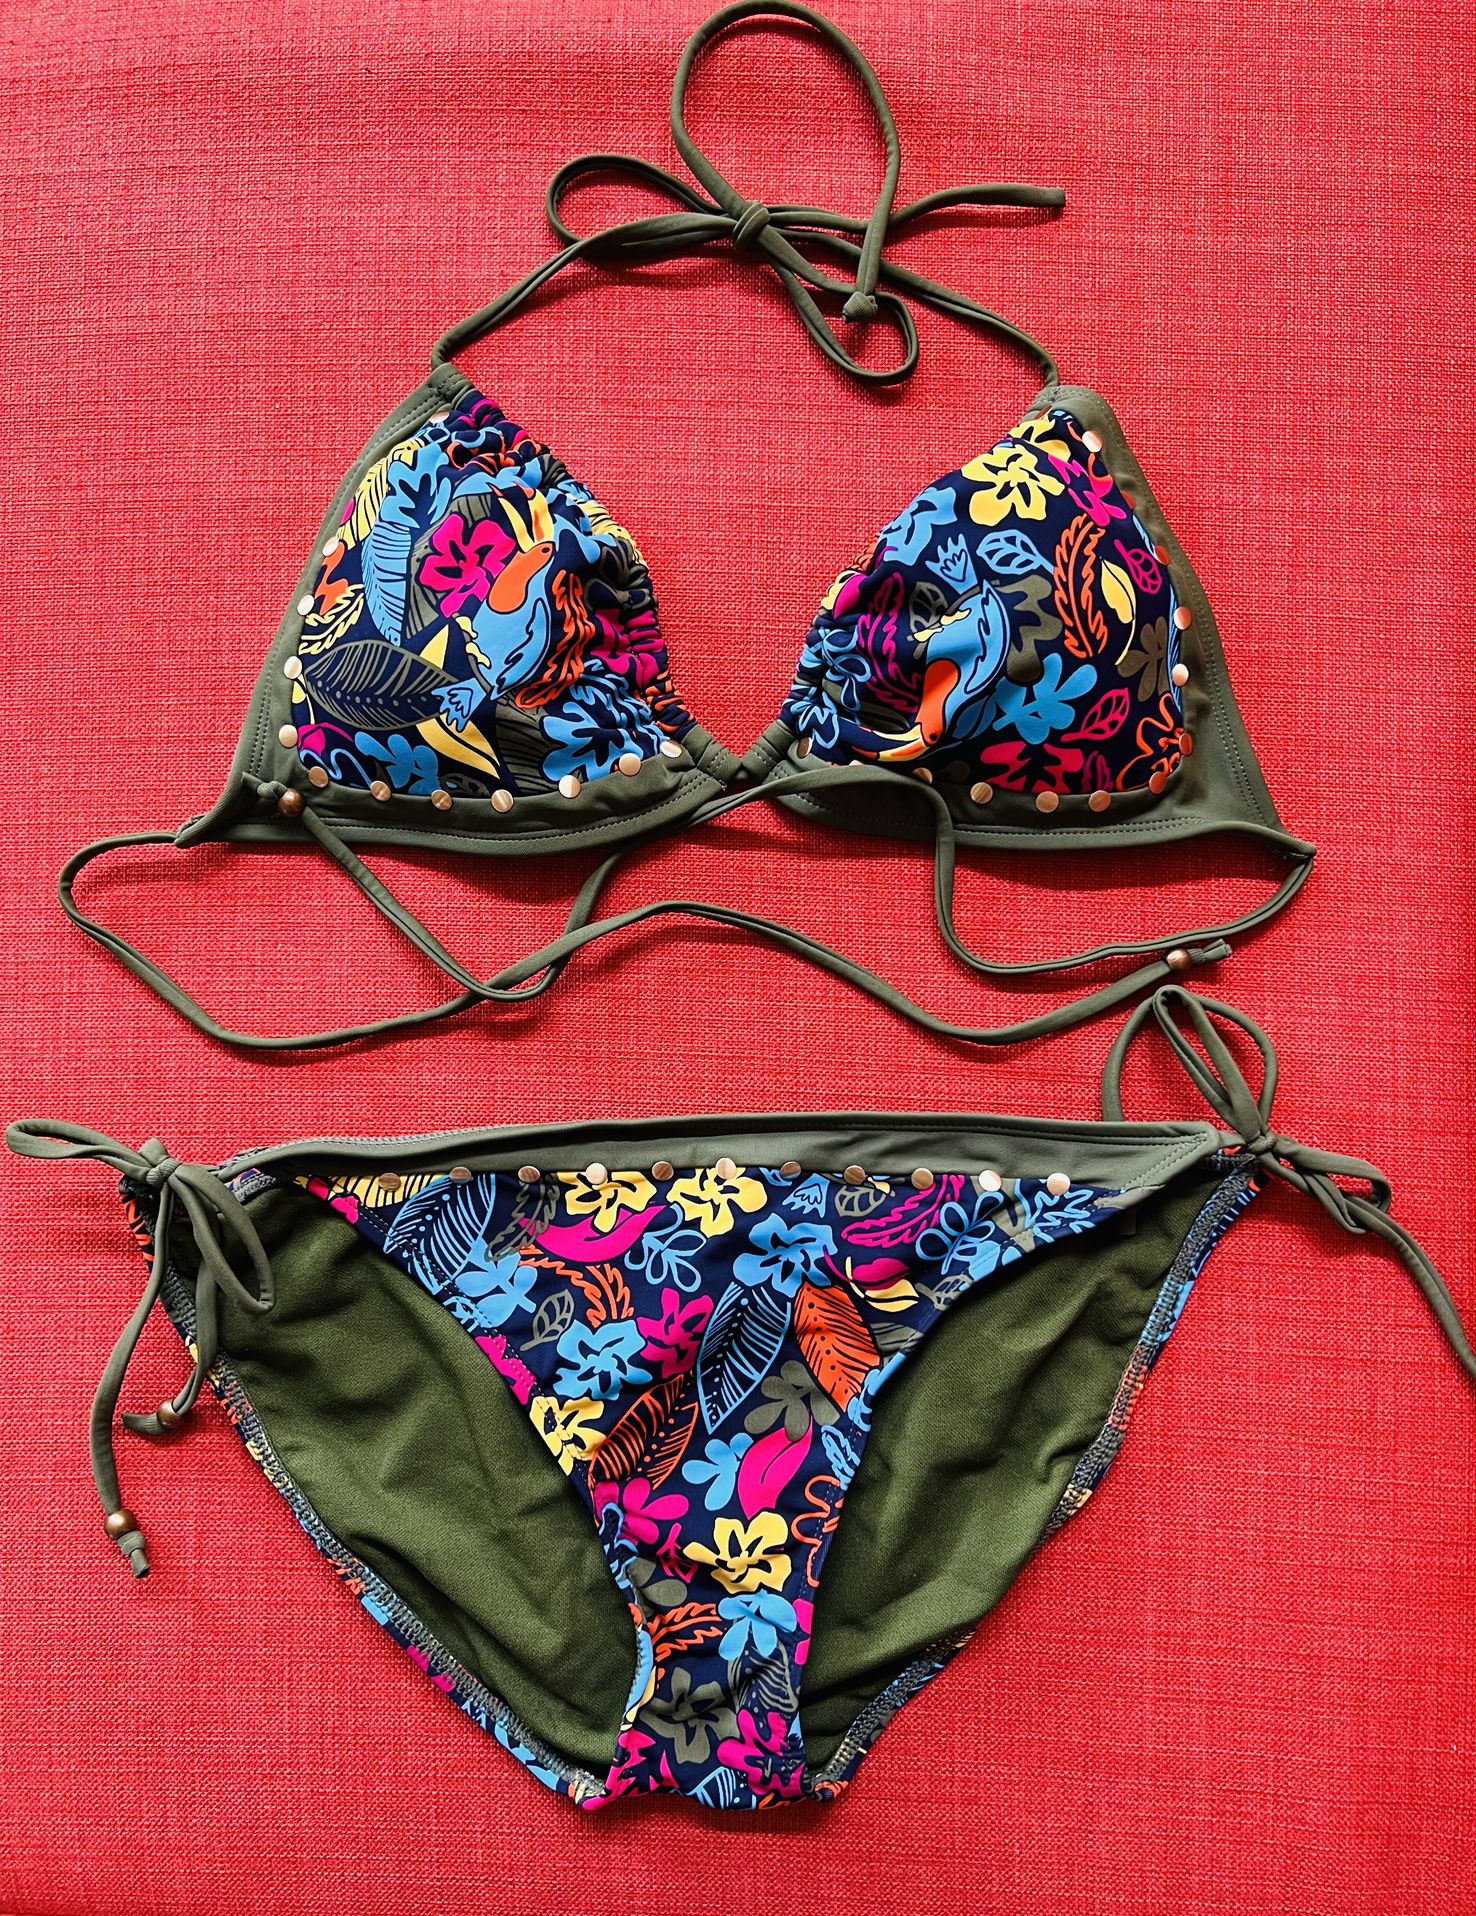 4 Pairs Of Bikini Bathing Suits (NEW) Size L  $30 Each